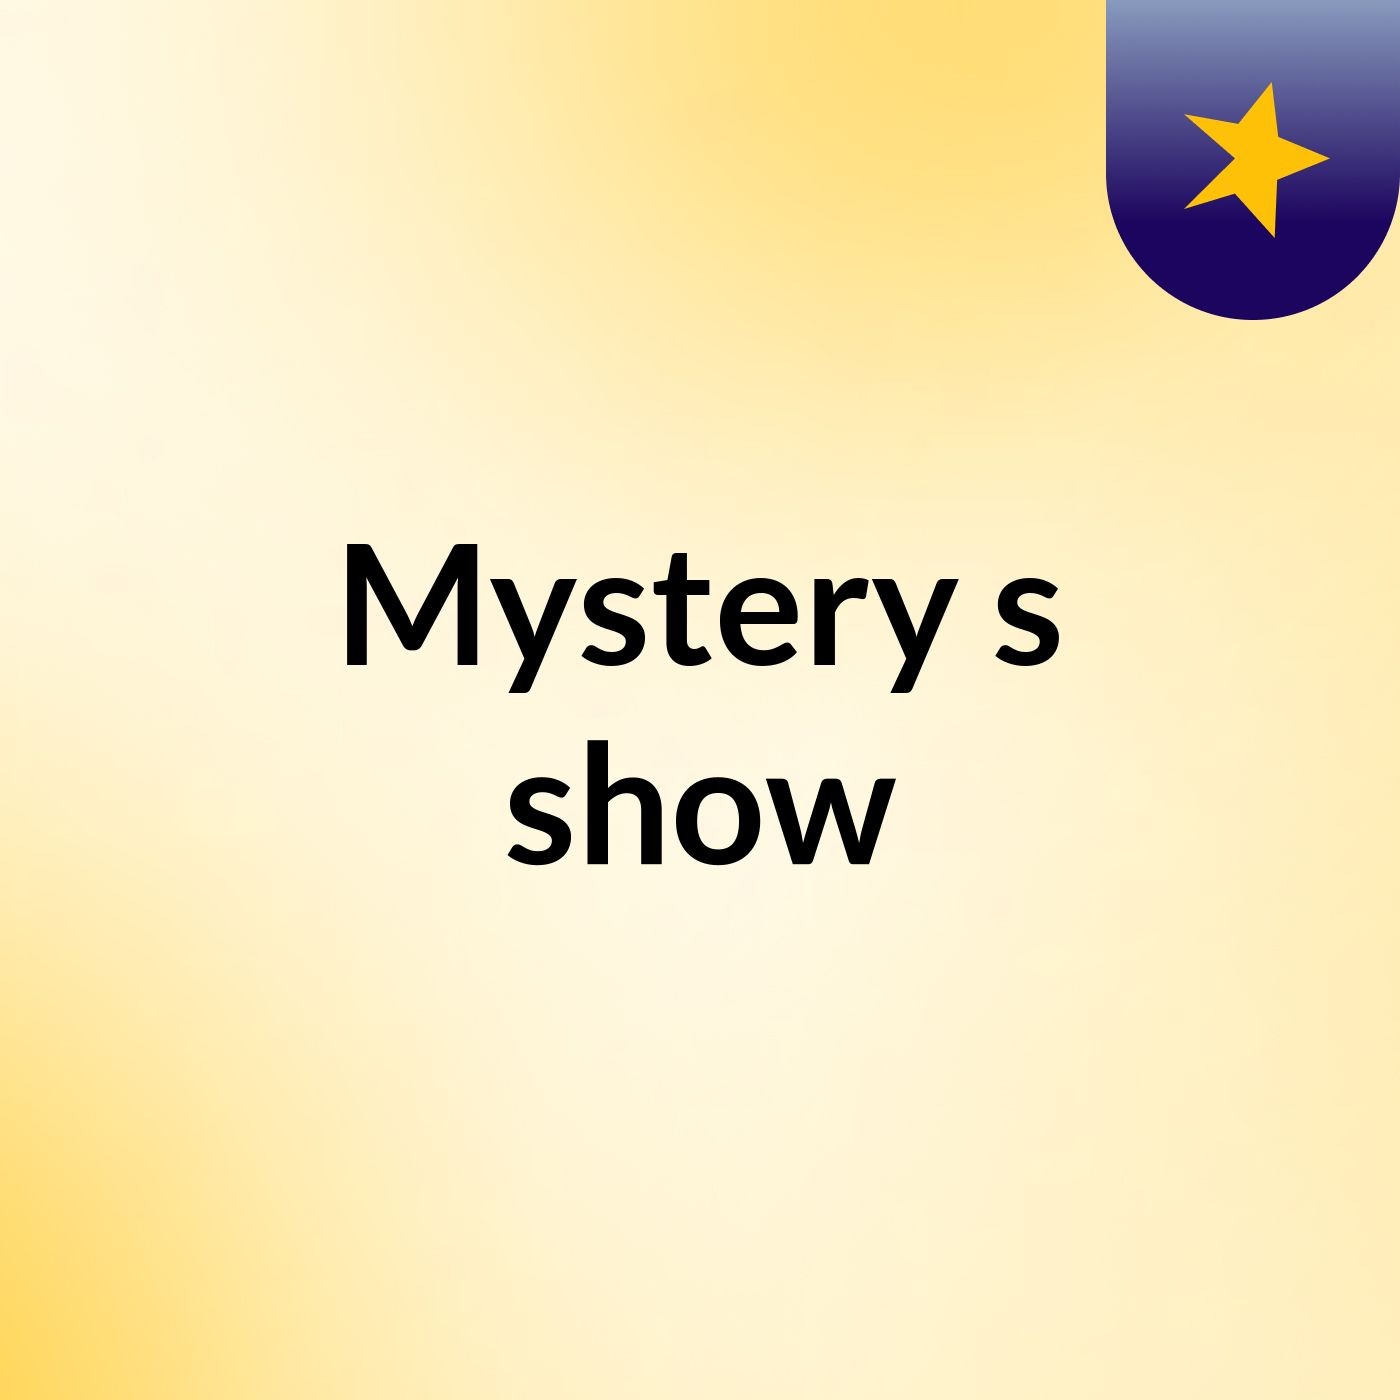 Mystery's show